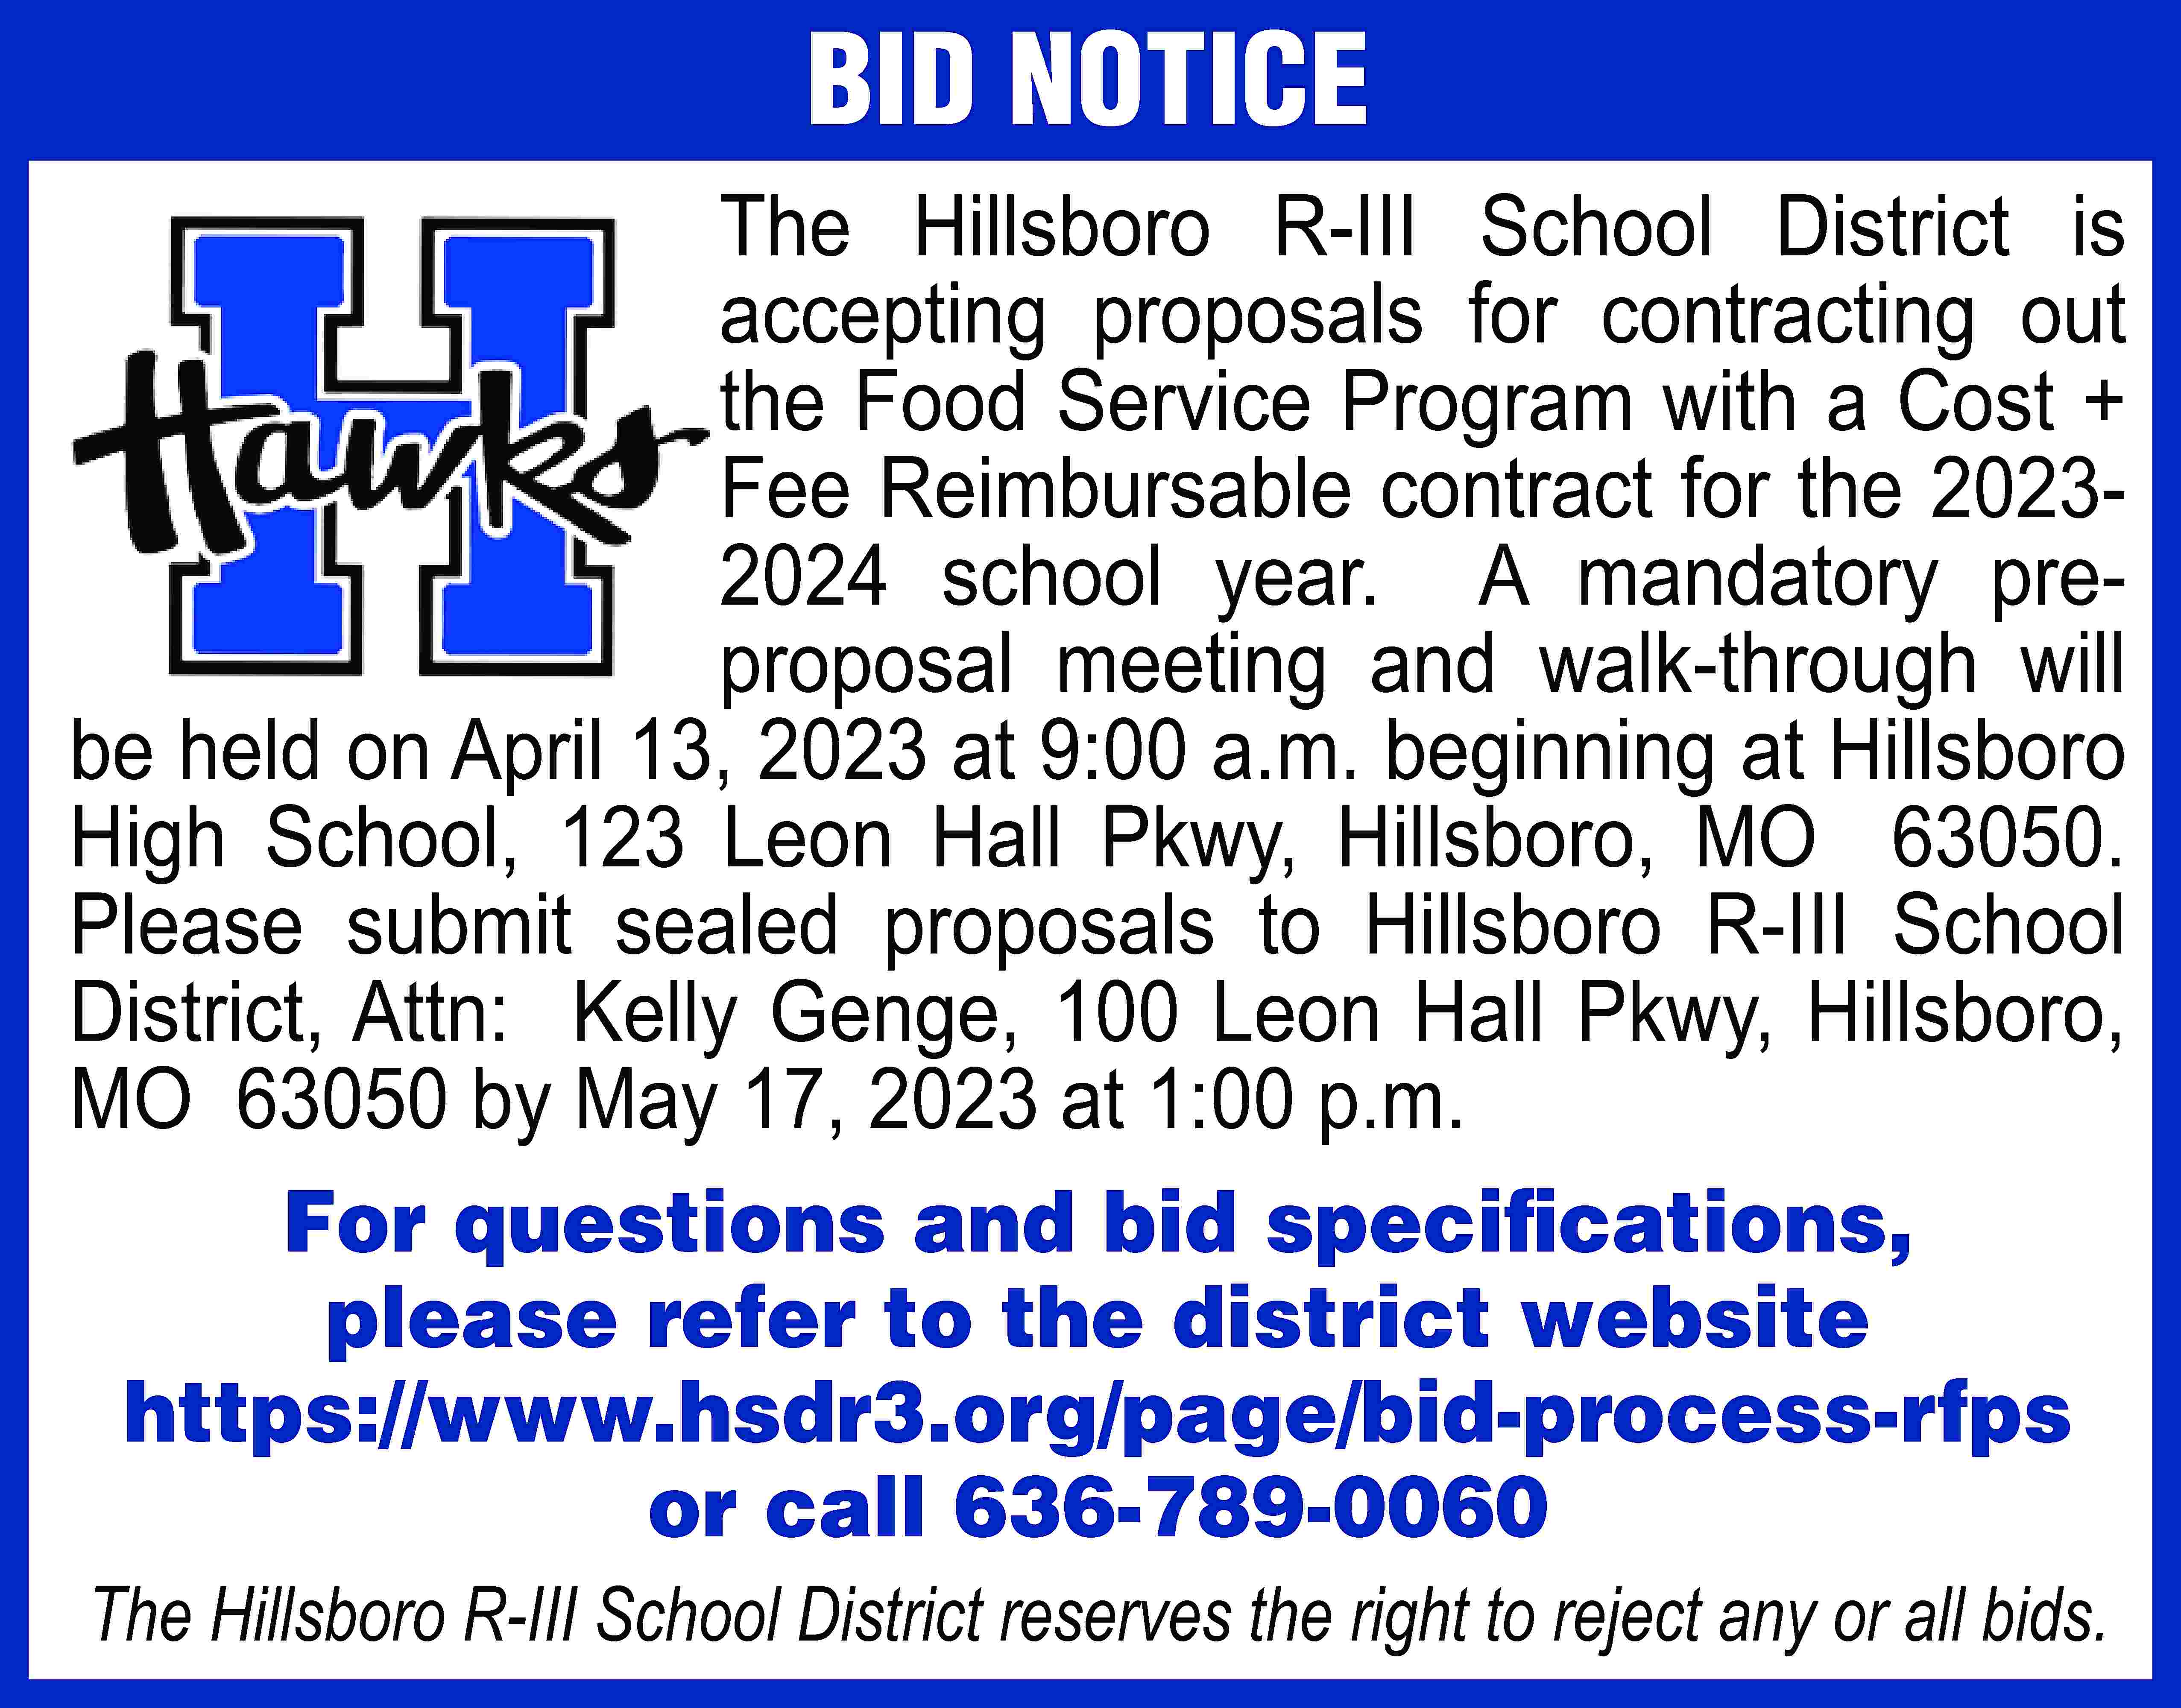 BID NOTICE The Hillsboro R-III  BID NOTICE The Hillsboro R-III School District is accepting proposals for contracting out the Food Service Program with a Cost + Fee Reimbursable contract for the 20232024 school year. A mandatory preproposal meeting and walk-through will be held on April 13, 2023 at 9:00 a.m. beginning at Hillsboro High School, 123 Leon Hall Pkwy, Hillsboro, MO 63050. Please submit sealed proposals to Hillsboro R-III School District, Attn: Kelly Genge, 100 Leon Hall Pkwy, Hillsboro, MO 63050 by May 17, 2023 at 1:00 p.m. For questions and bid specifications, please refer to the district website https://www.hsdr3.org/page/bid-process-rfps or call 636-789-0060 The Hillsboro R-III School District reserves the right to reject any or all bids.